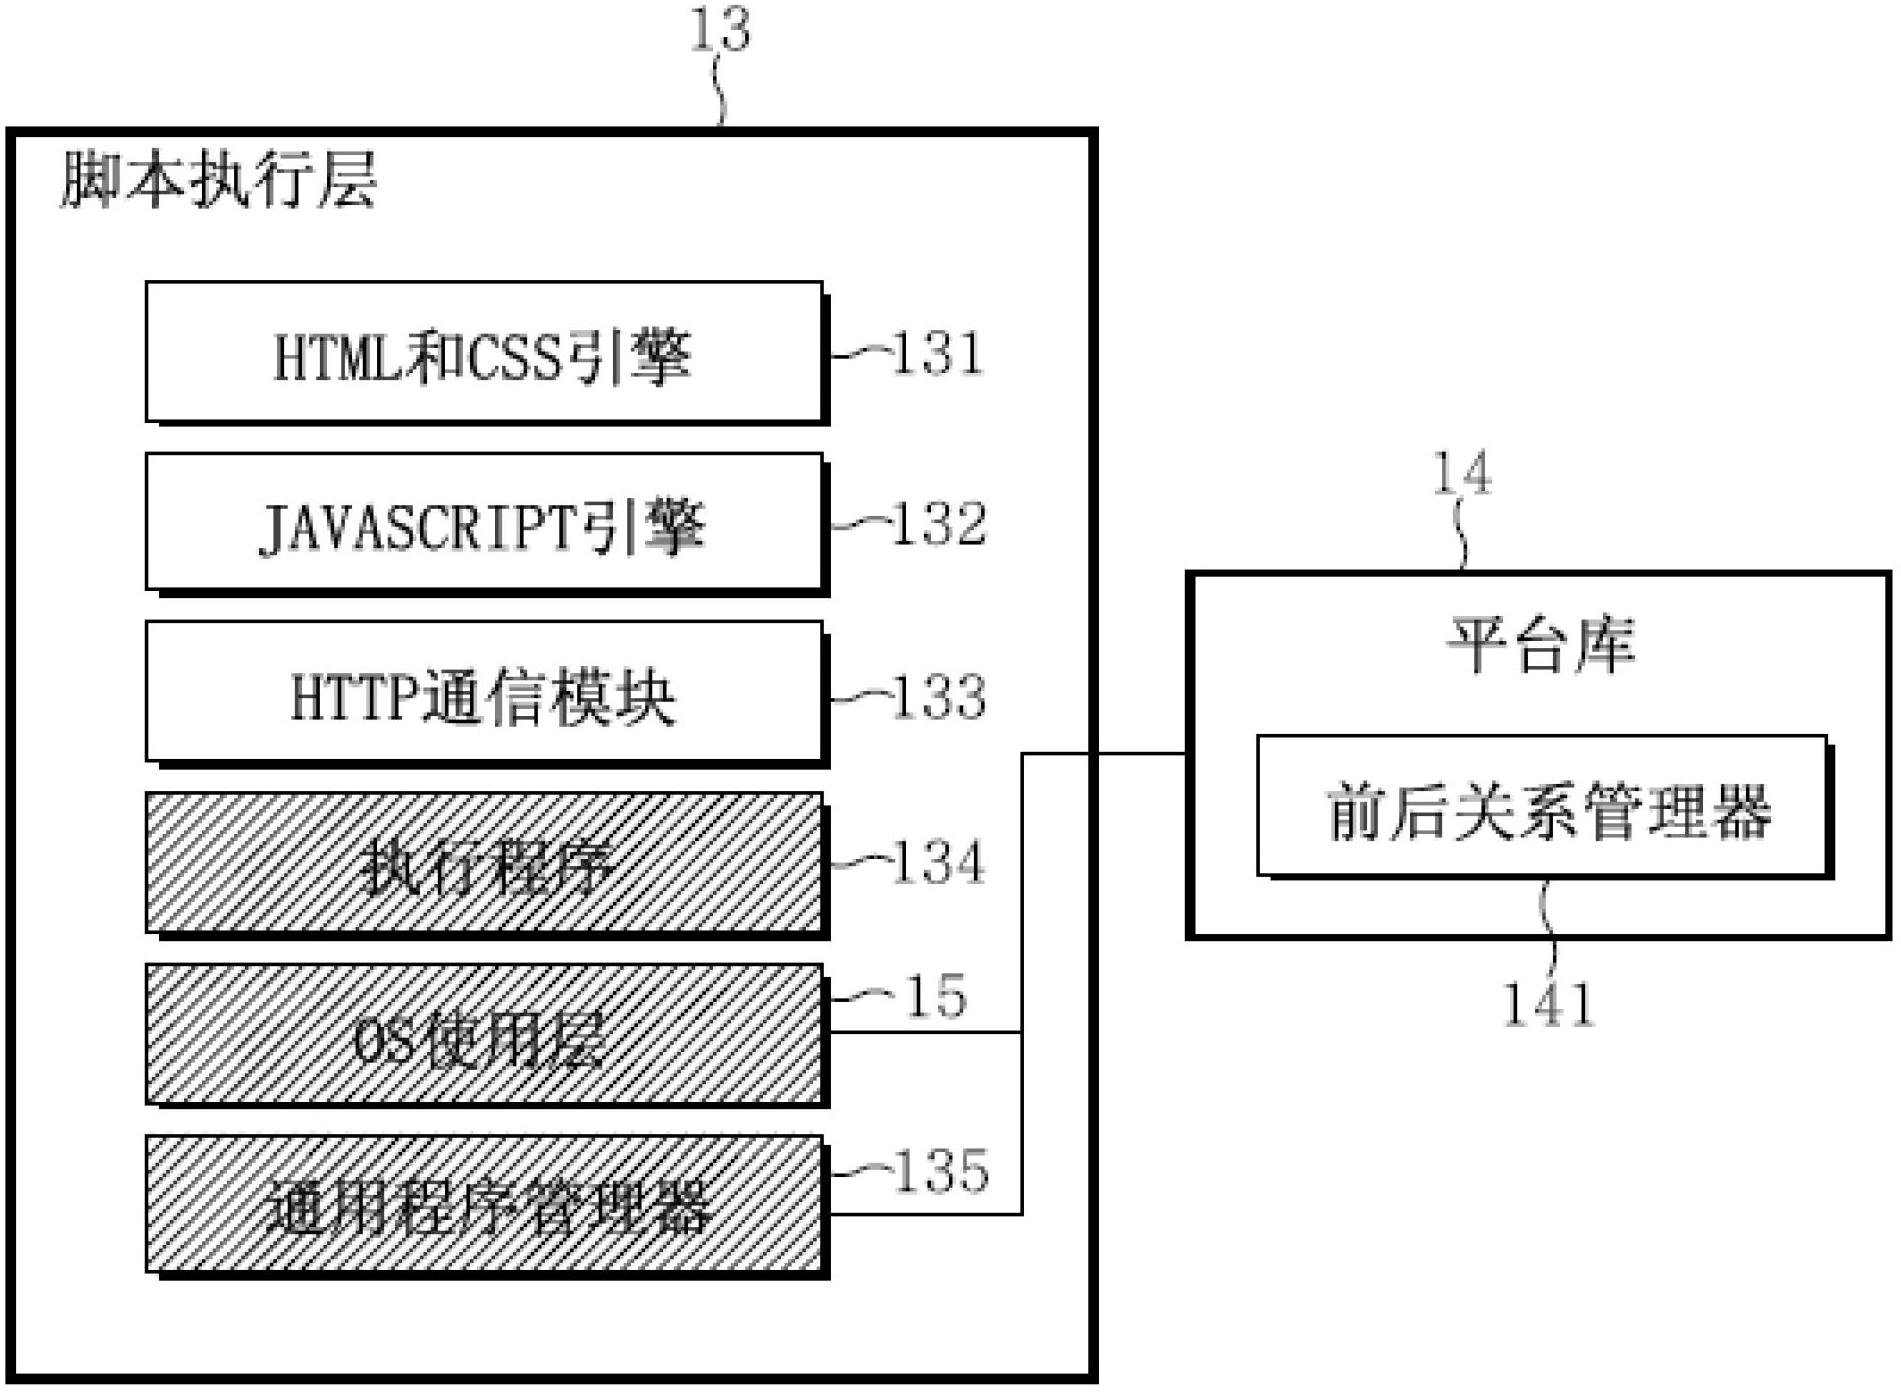 Apparatus and method for implementing web-based user interface on mobile terminal